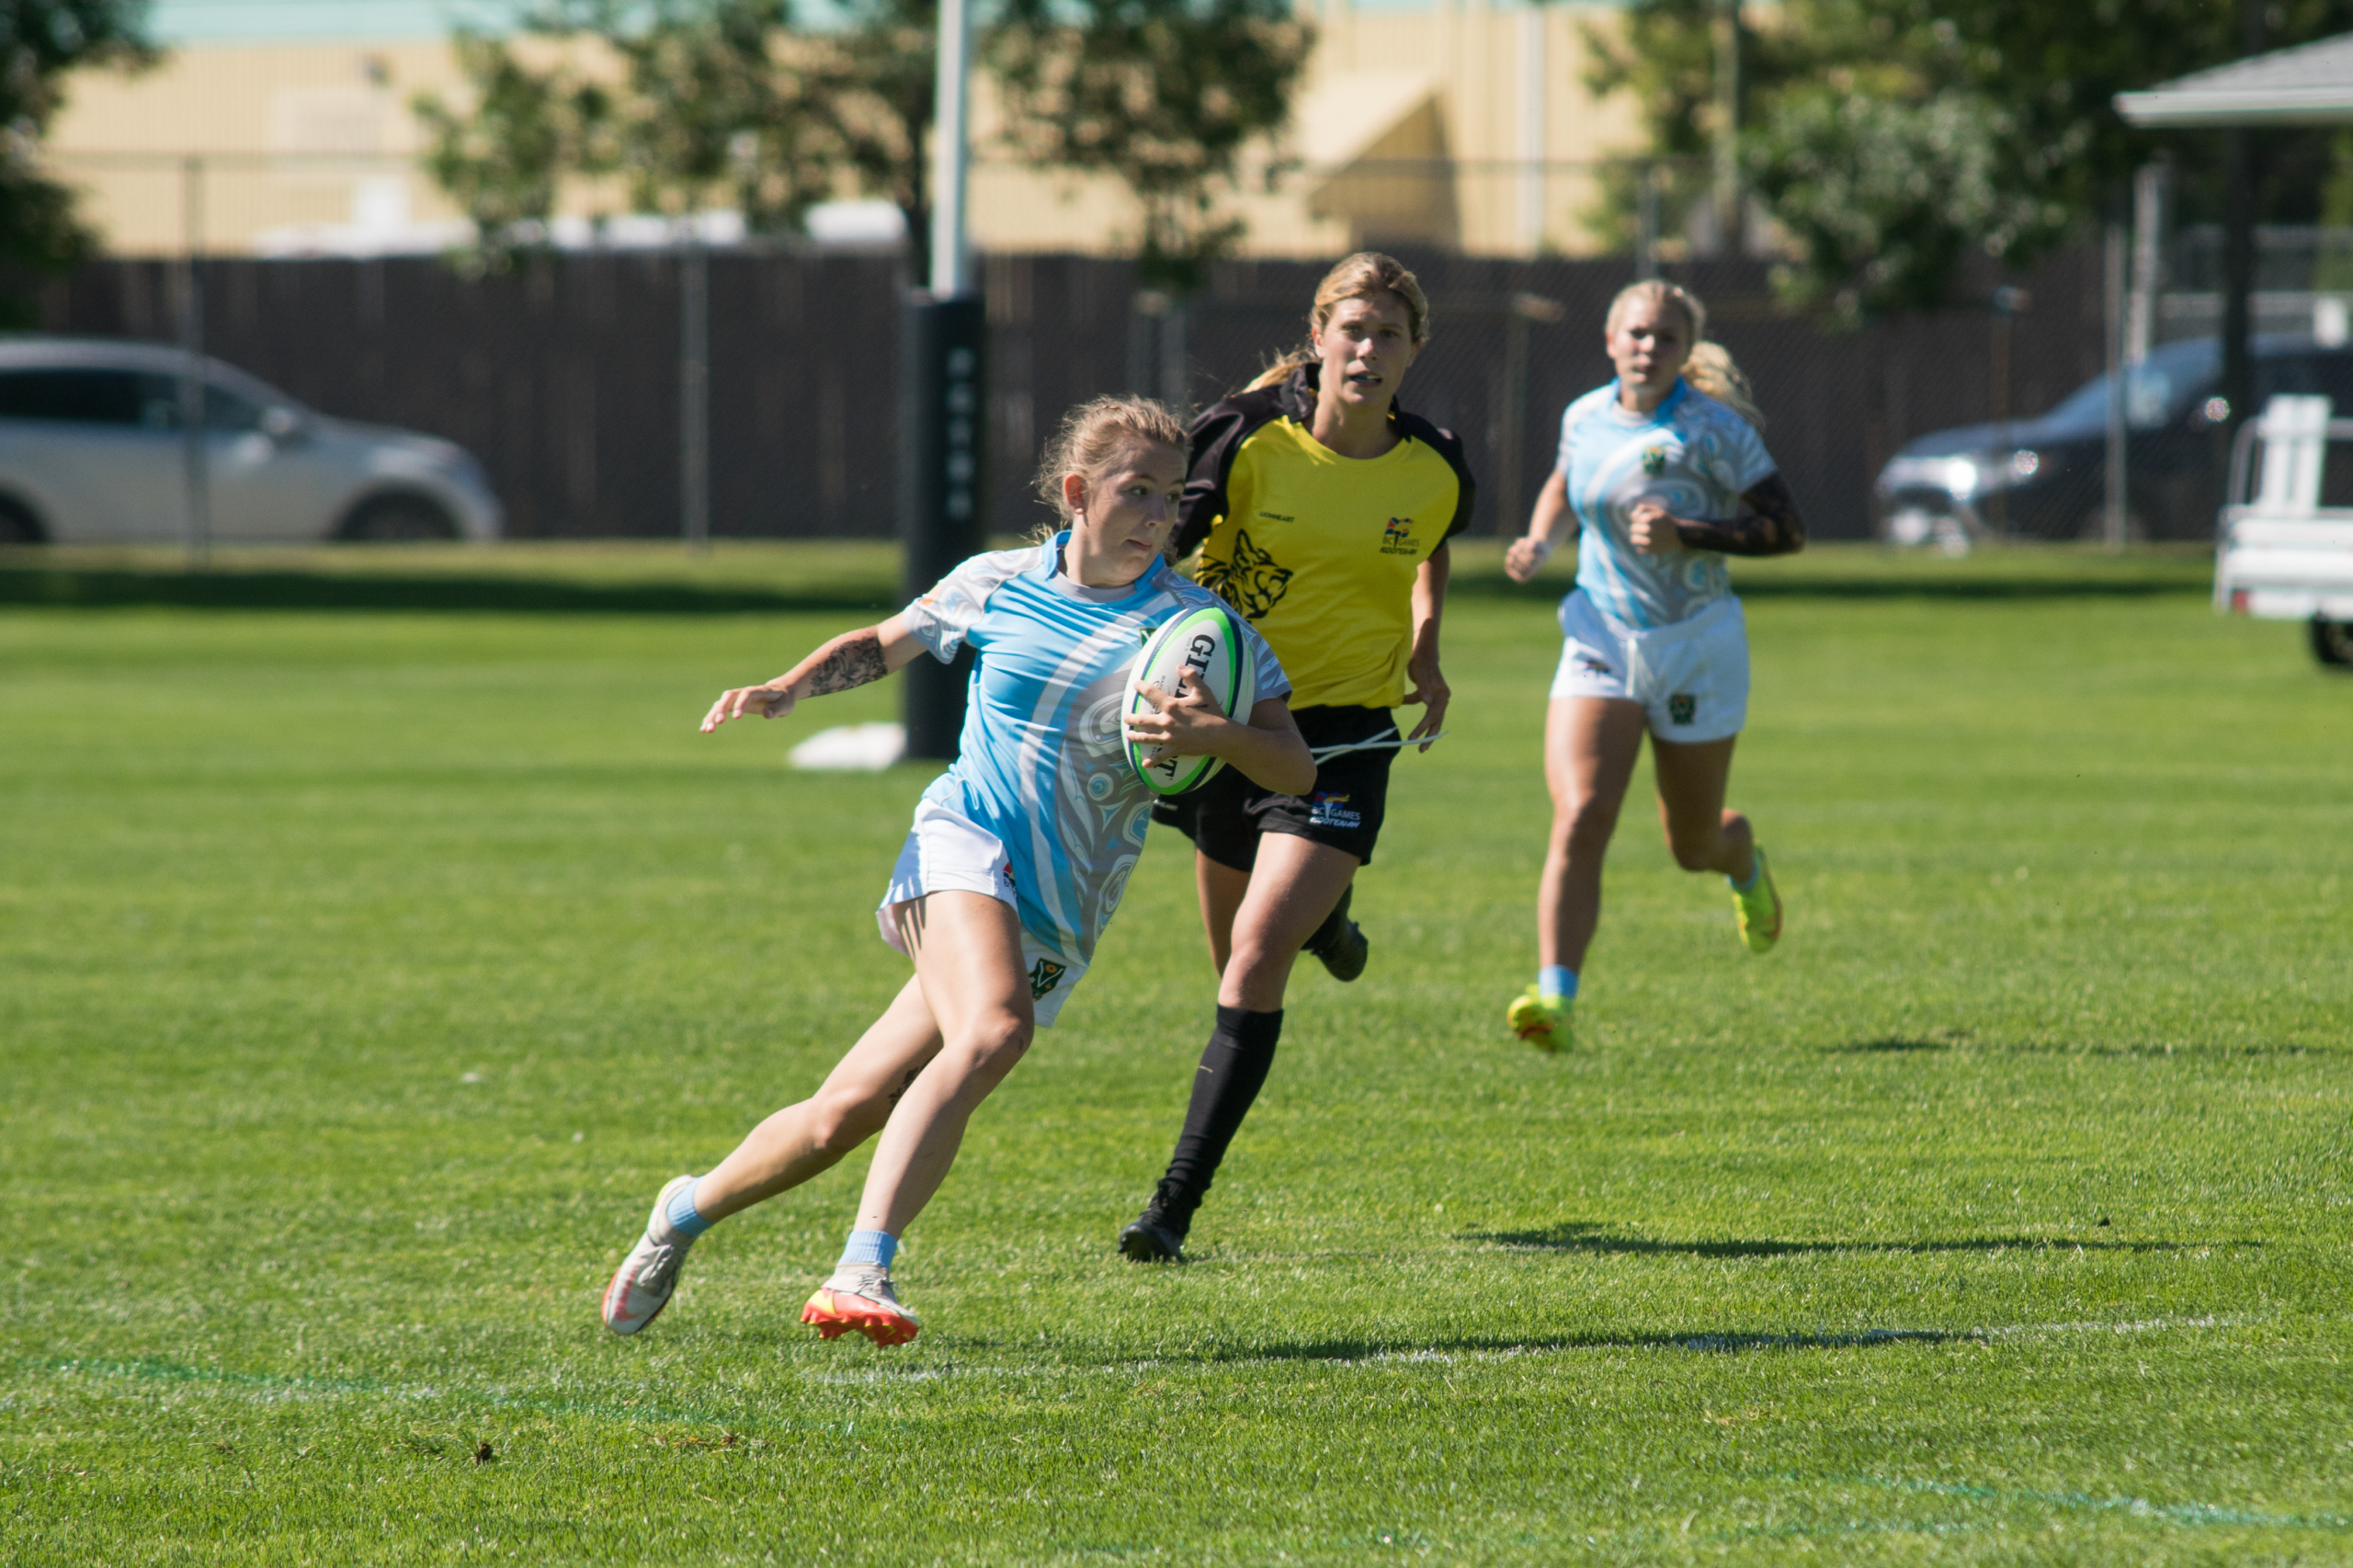 Action from the 2022 BC Summer Games Girls Rugby competition